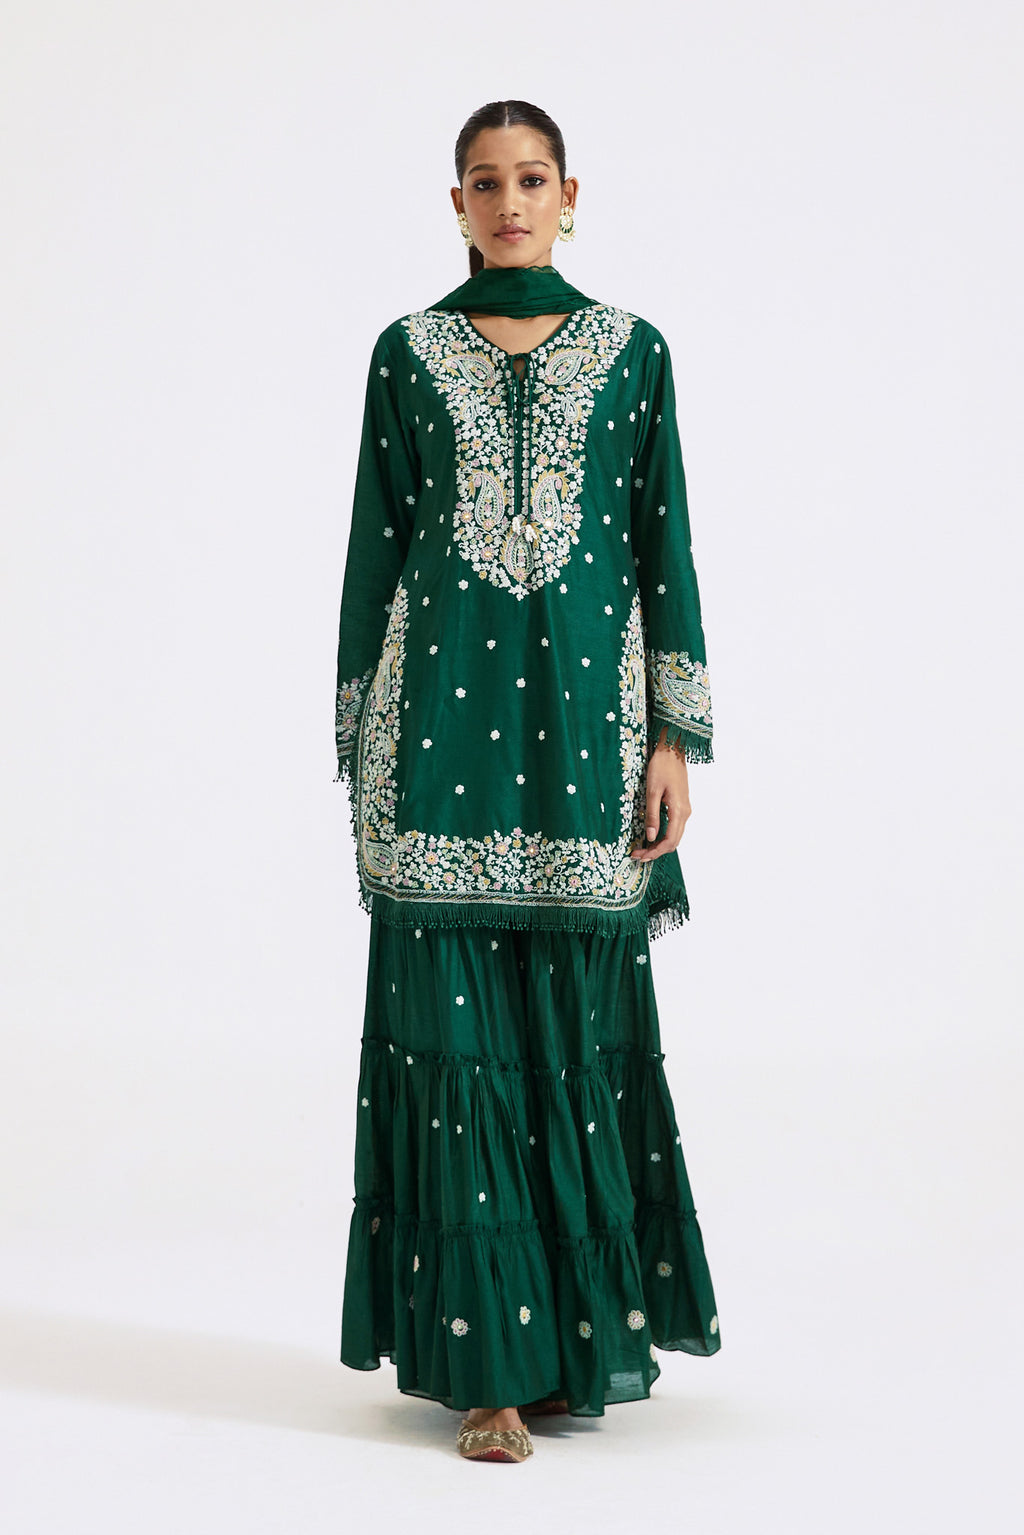 Buy bottle green embroidered chanderi sharara suit online in USA with dupatta. Shop the best and latest designs in embroidered sarees, designer sarees, Anarkali suit, lehengas, sharara suits for weddings and special occasions from Pure Elegance Indian fashion store in USA.-full view